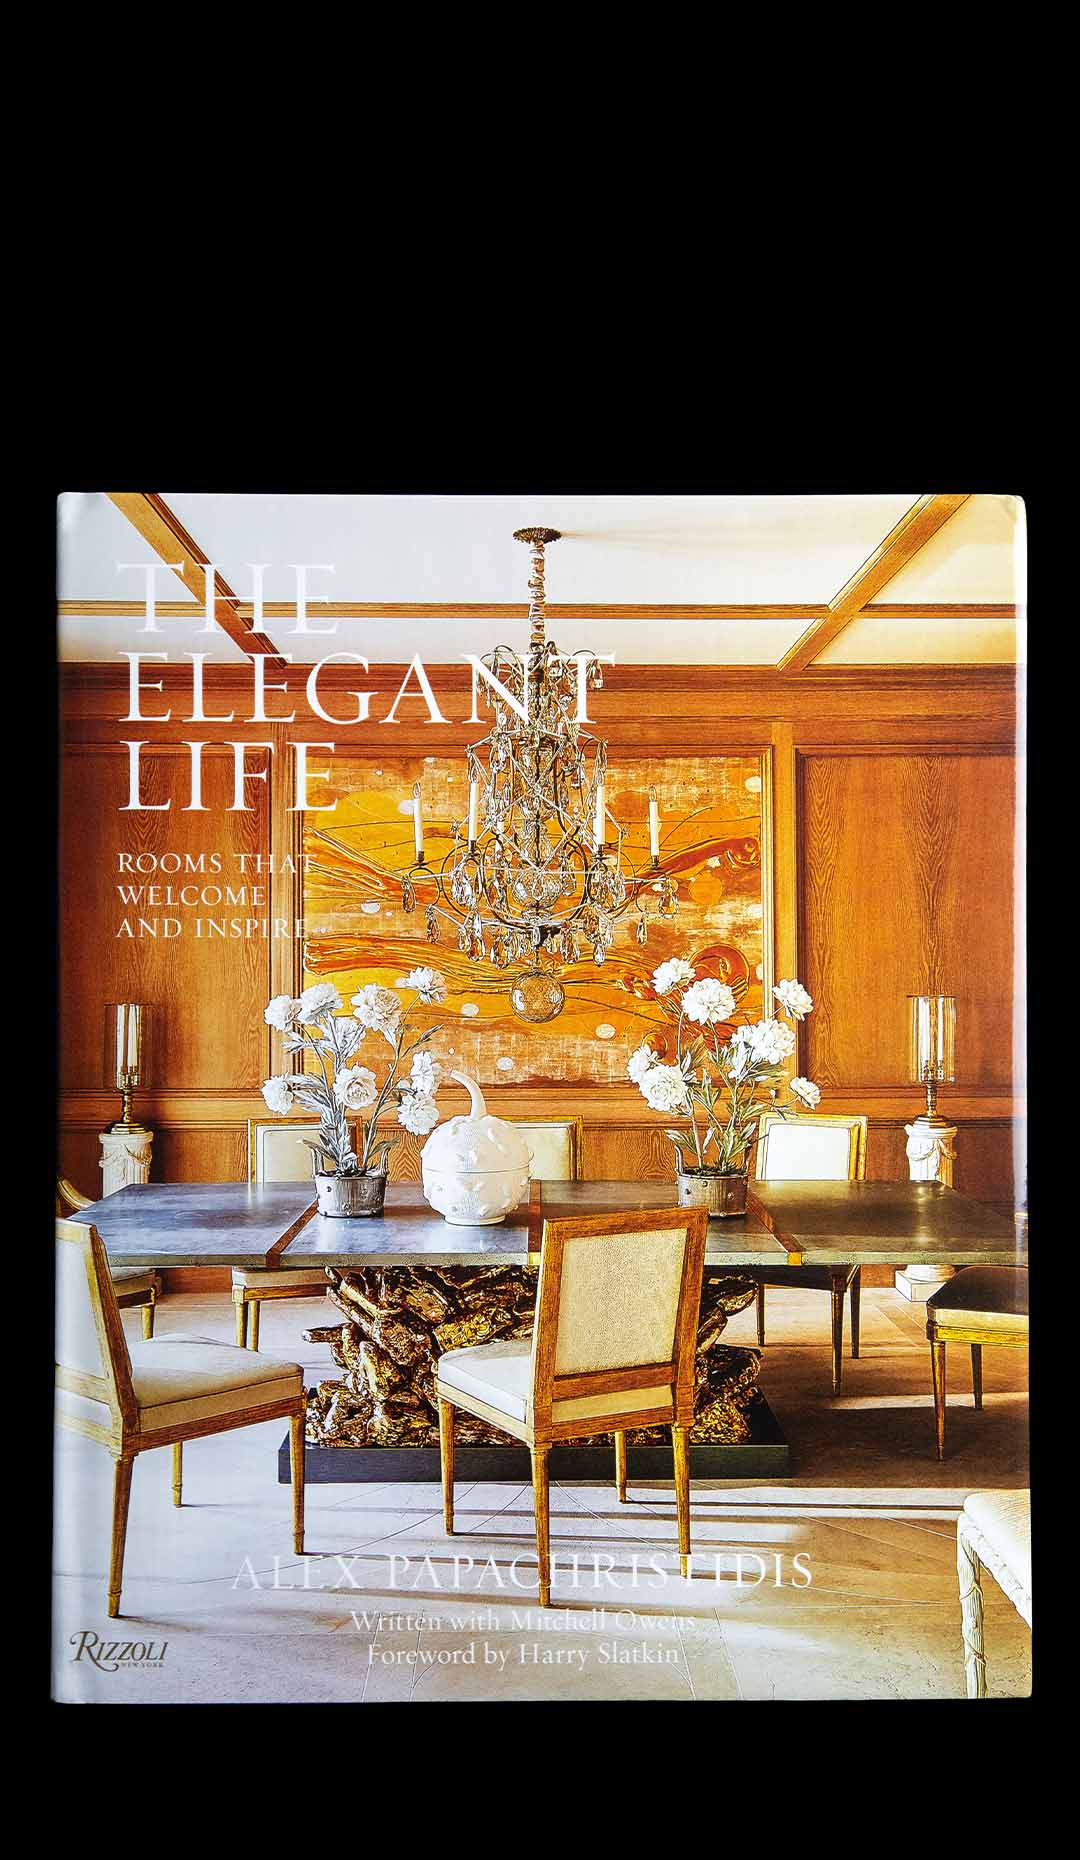 The Elegant Life: Rooms That Welcome and Inspire, Signed